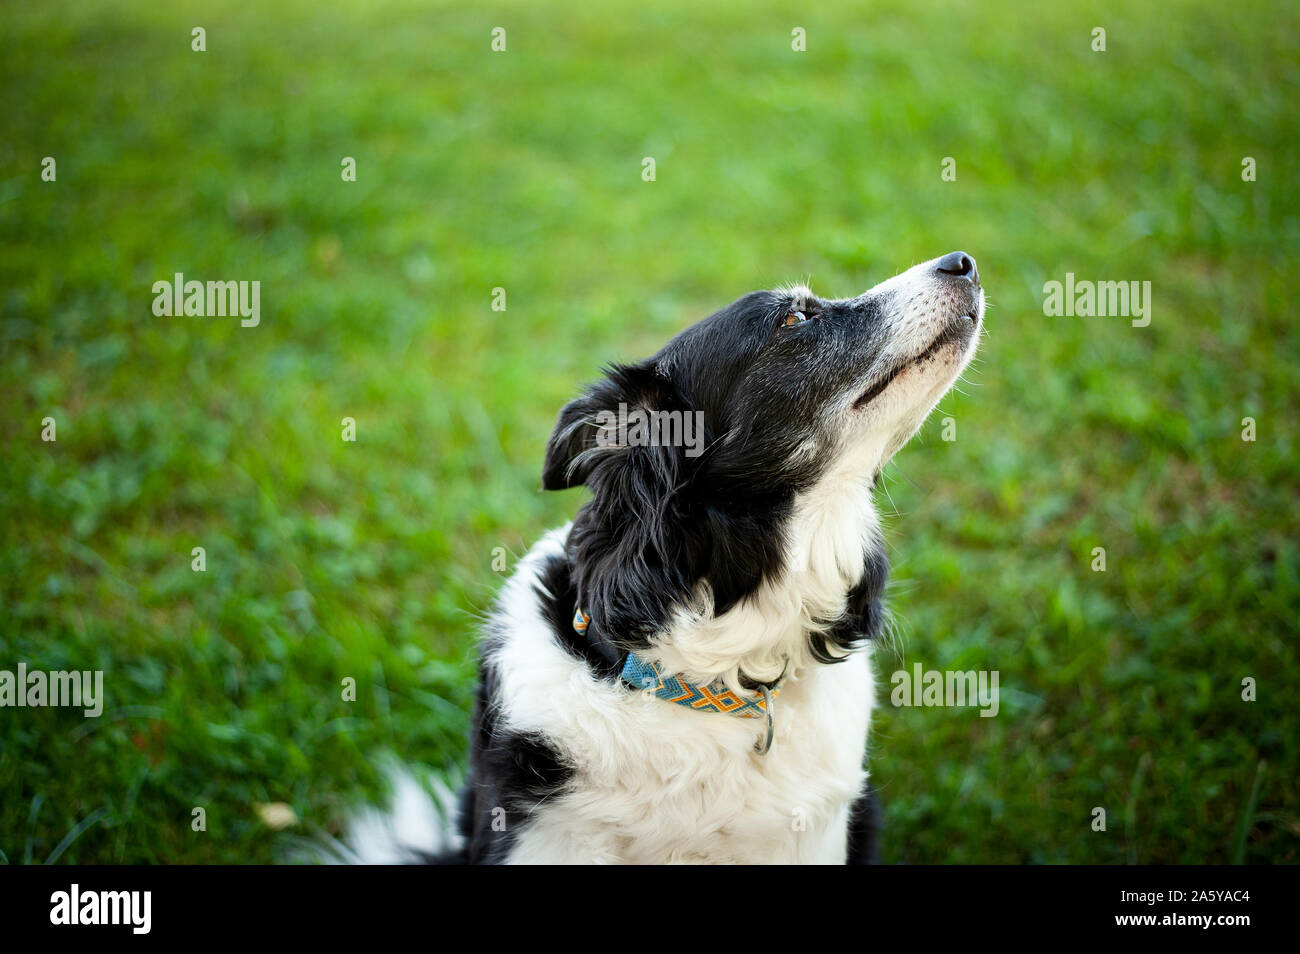 Old black and white border collie. Portrait of cute dog. Stock Photo